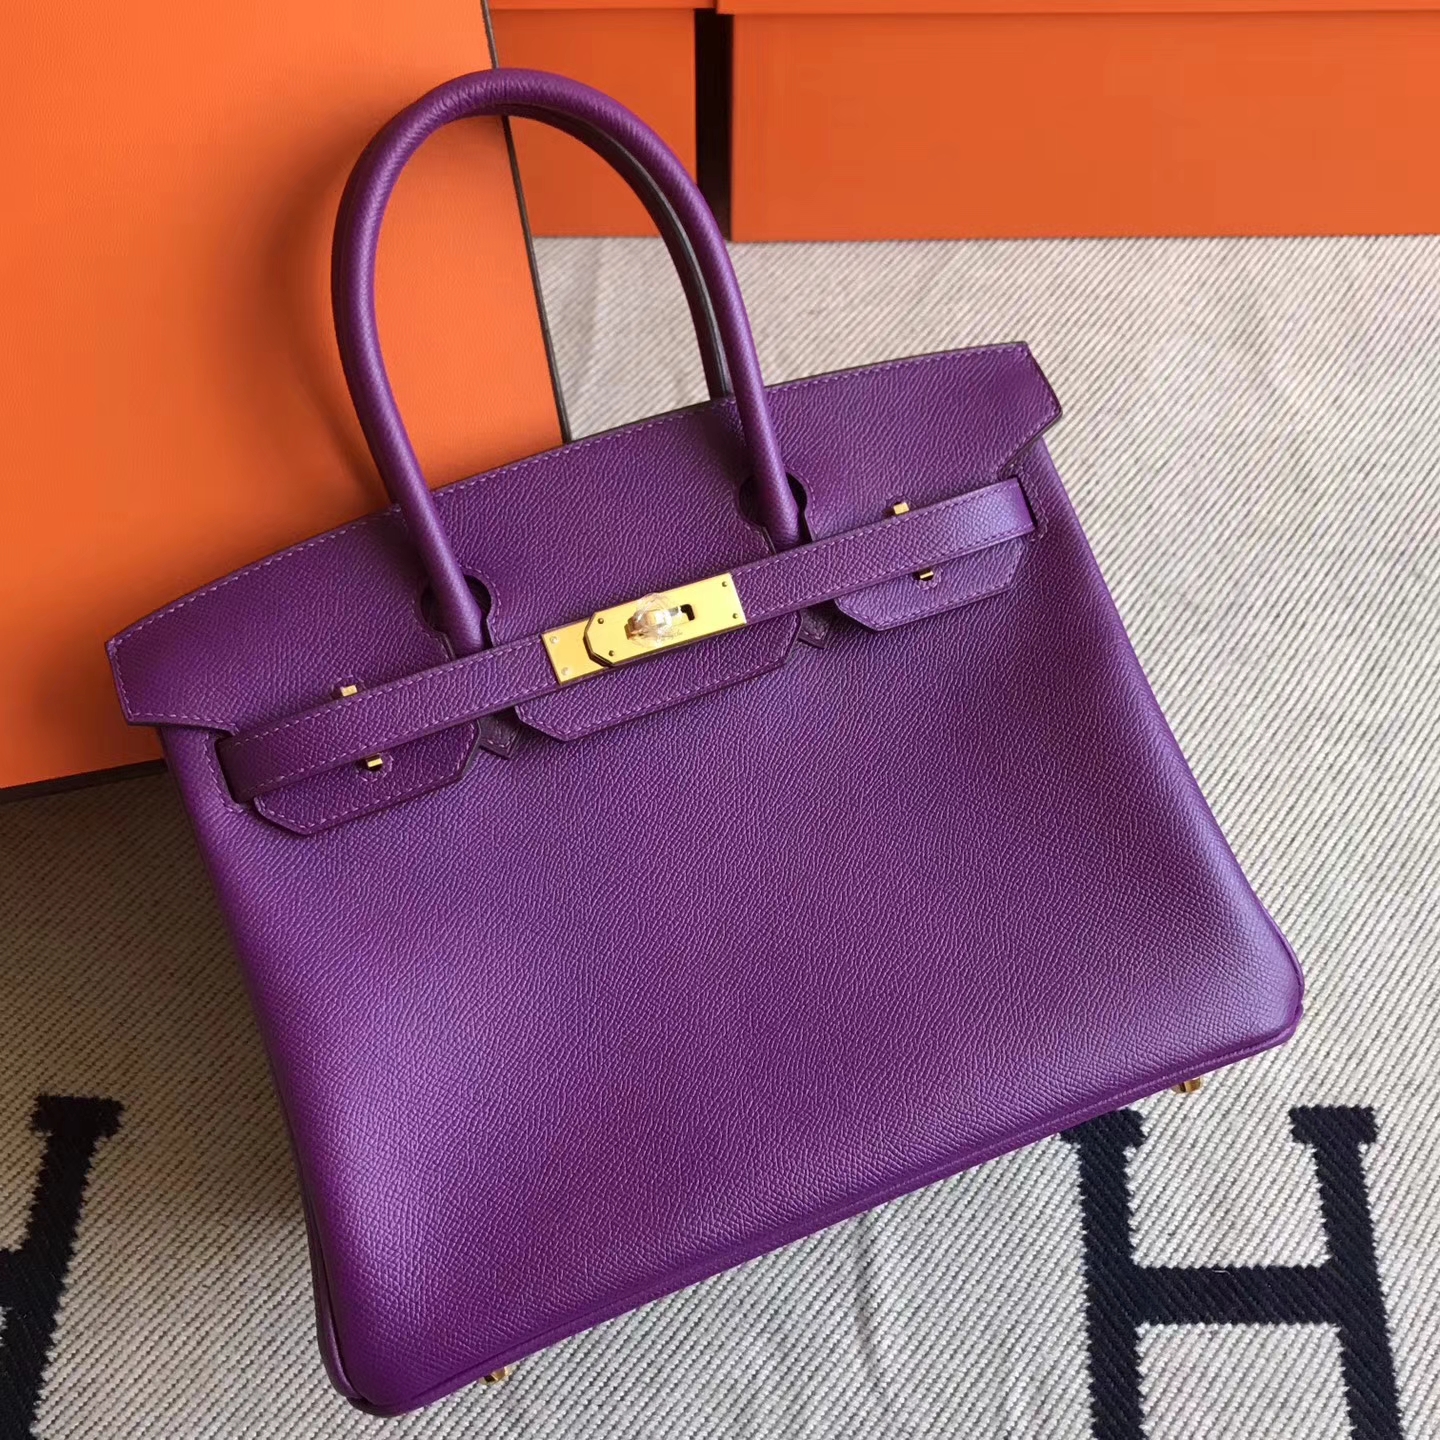 Hermes Handbags Named After Who | IQS Executive